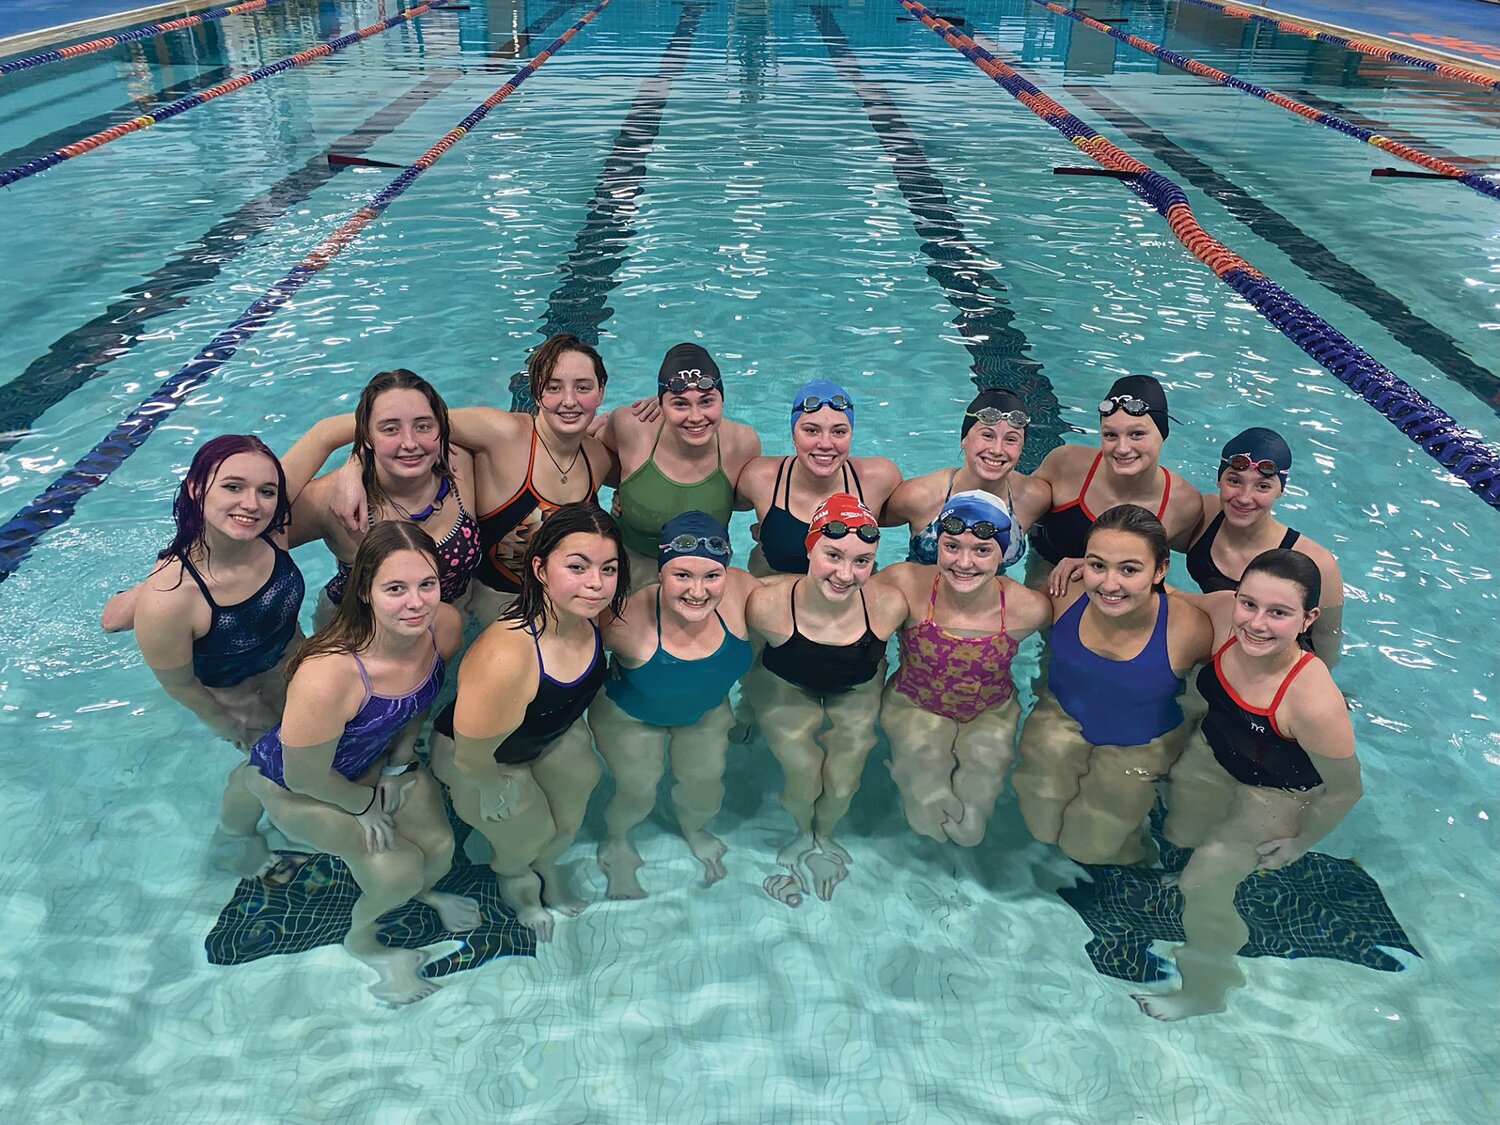 North Montgomery girls swimming is off to an 8-0 start in 2023-24. The Chargers will look to defend their county title on Saturday and continue what's been a terrific start to the season.